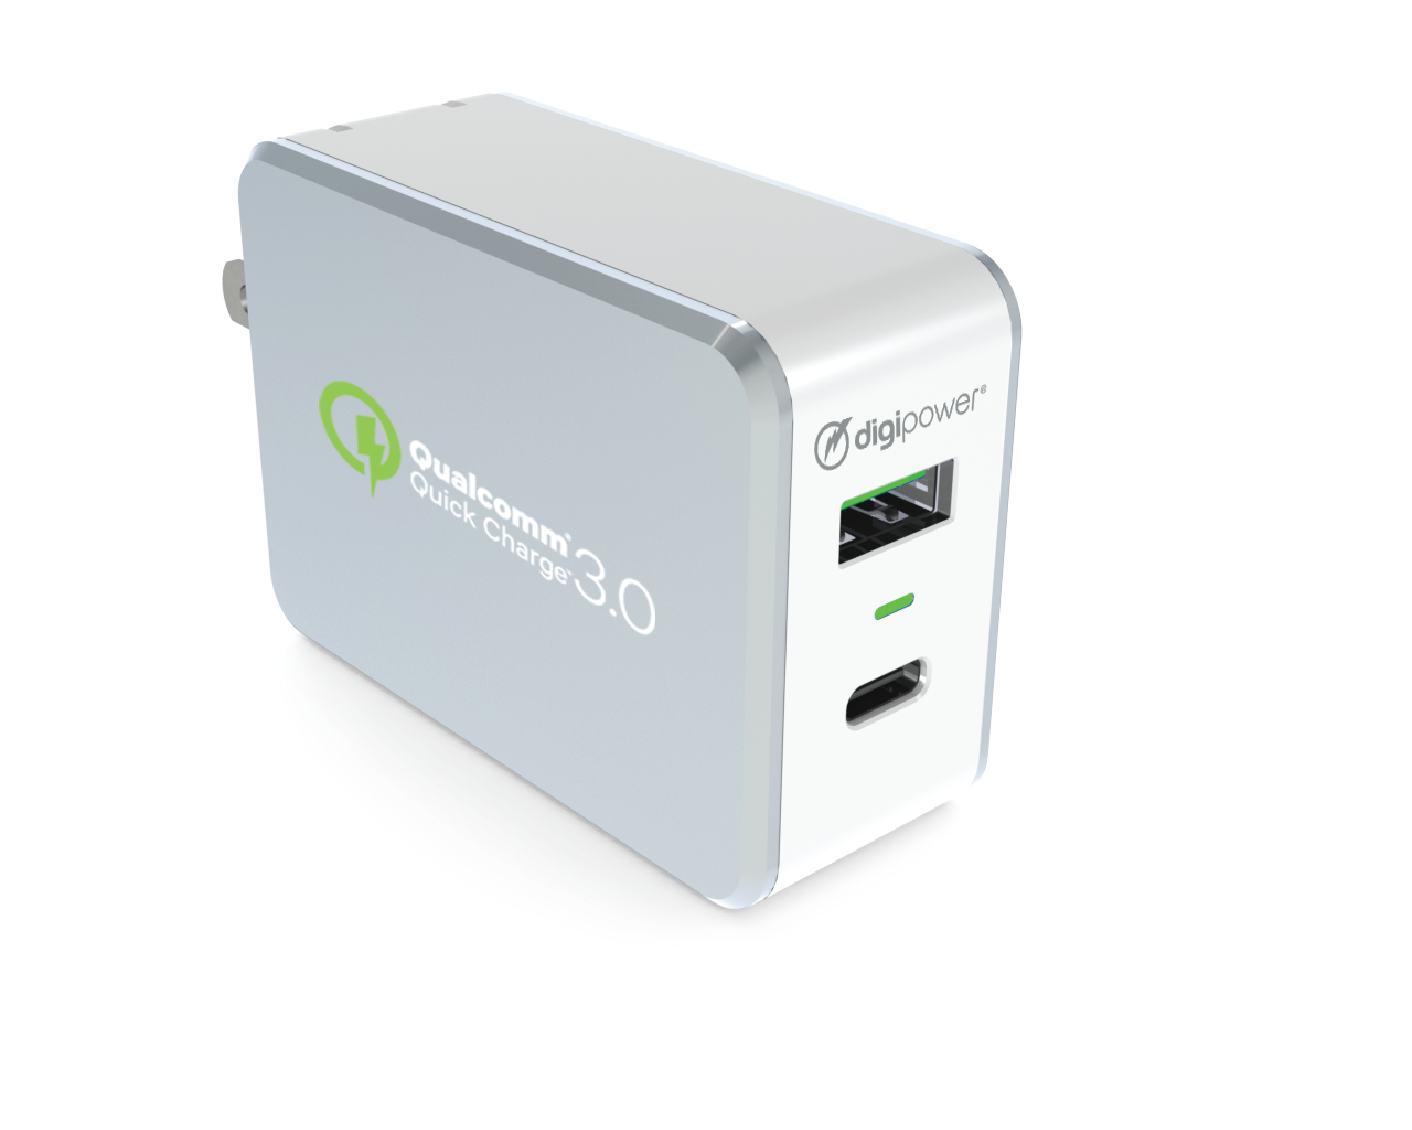 33Watt USB-C Charger with InstaSense + Qualcomm Quick Charge 3.0 Technology